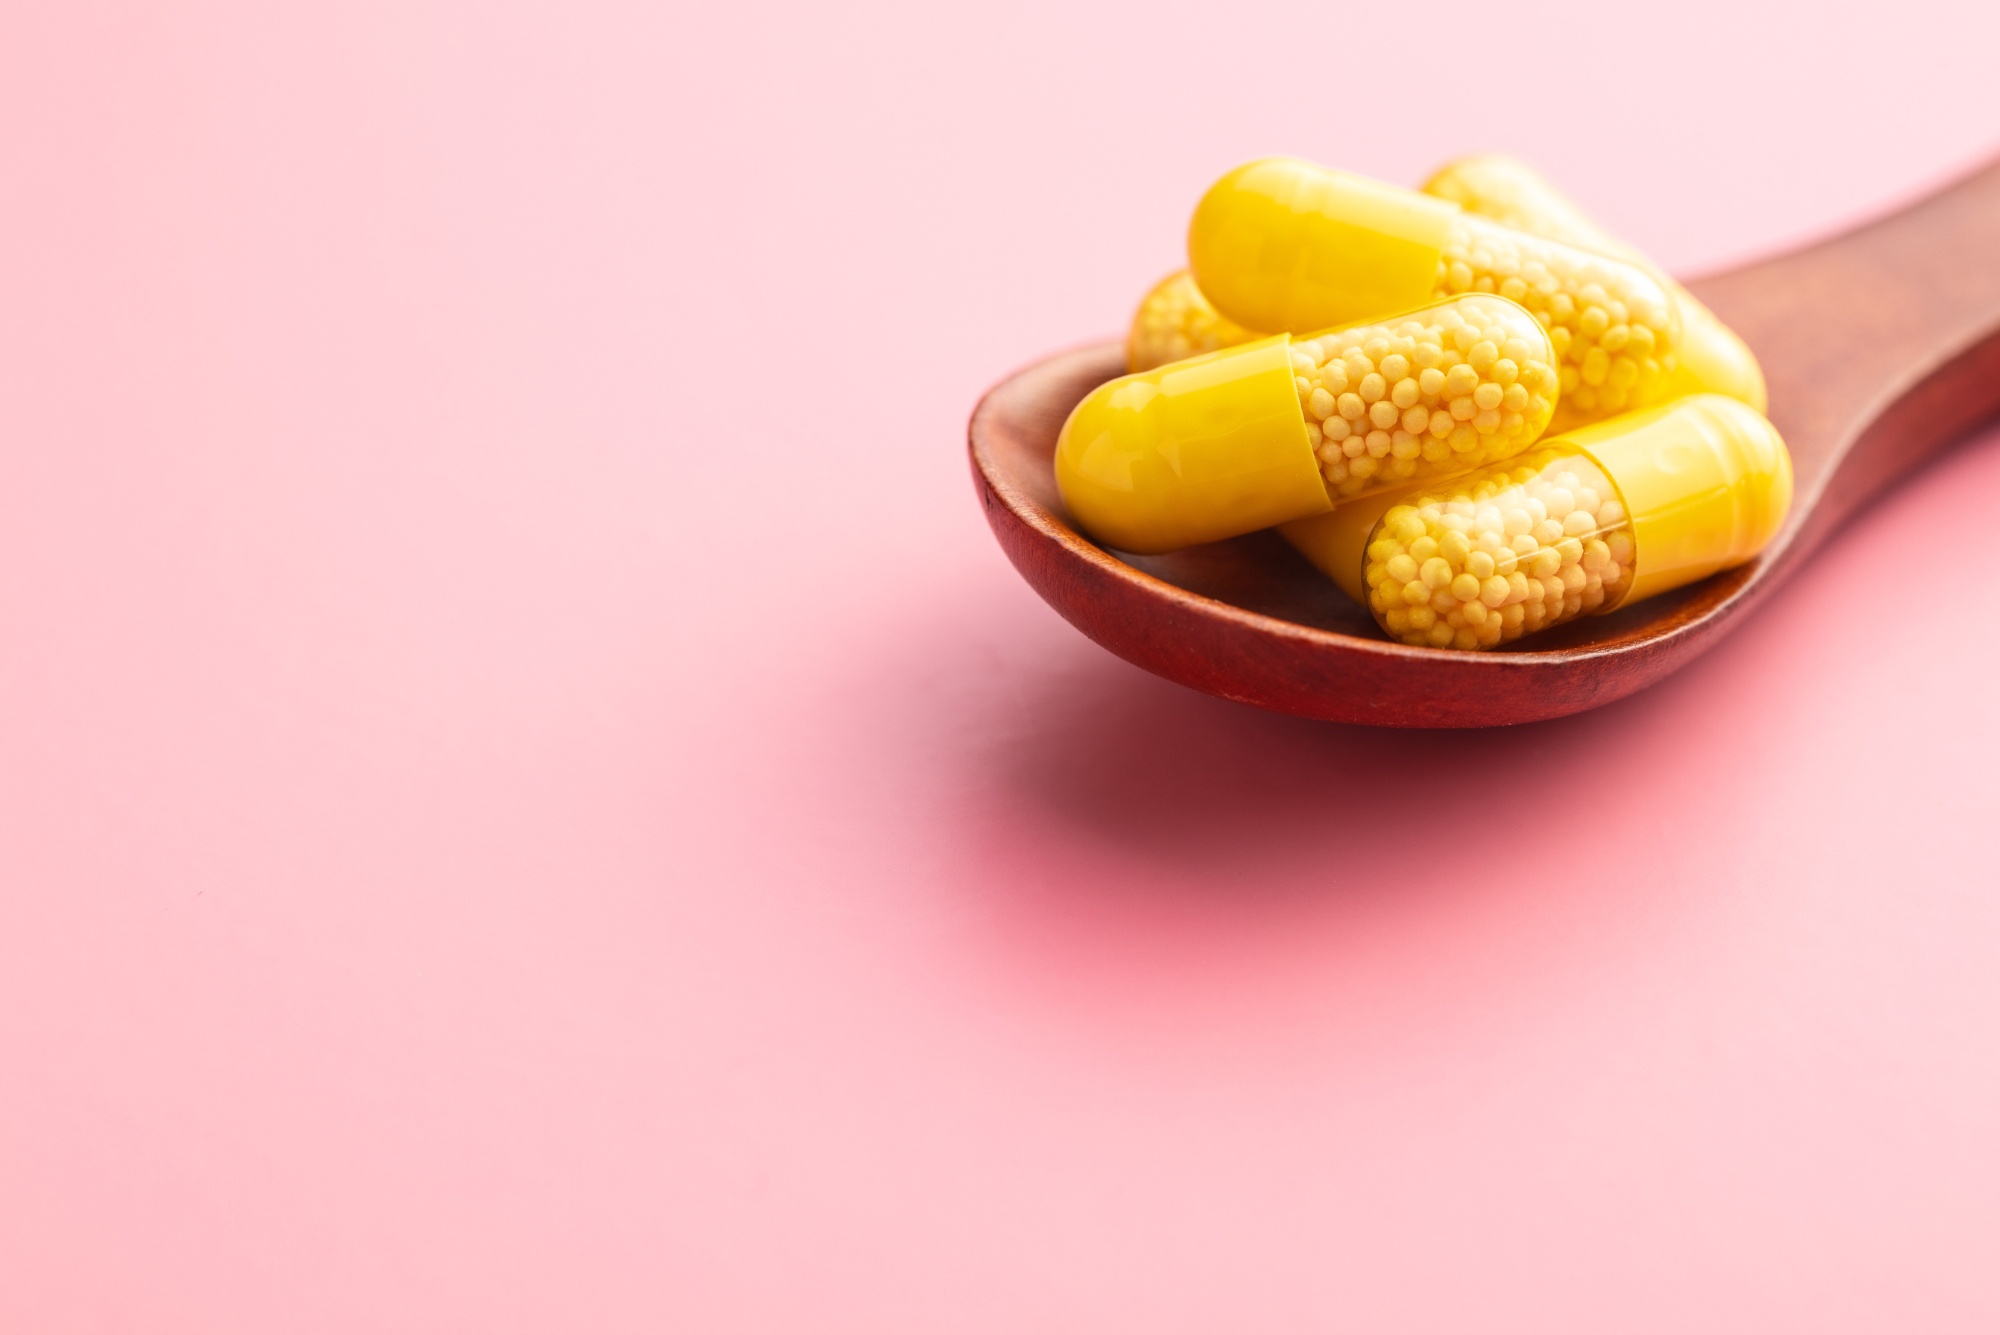 Yellow vitamins for anti aging sit on a wooden spoon in front of a light pink background.